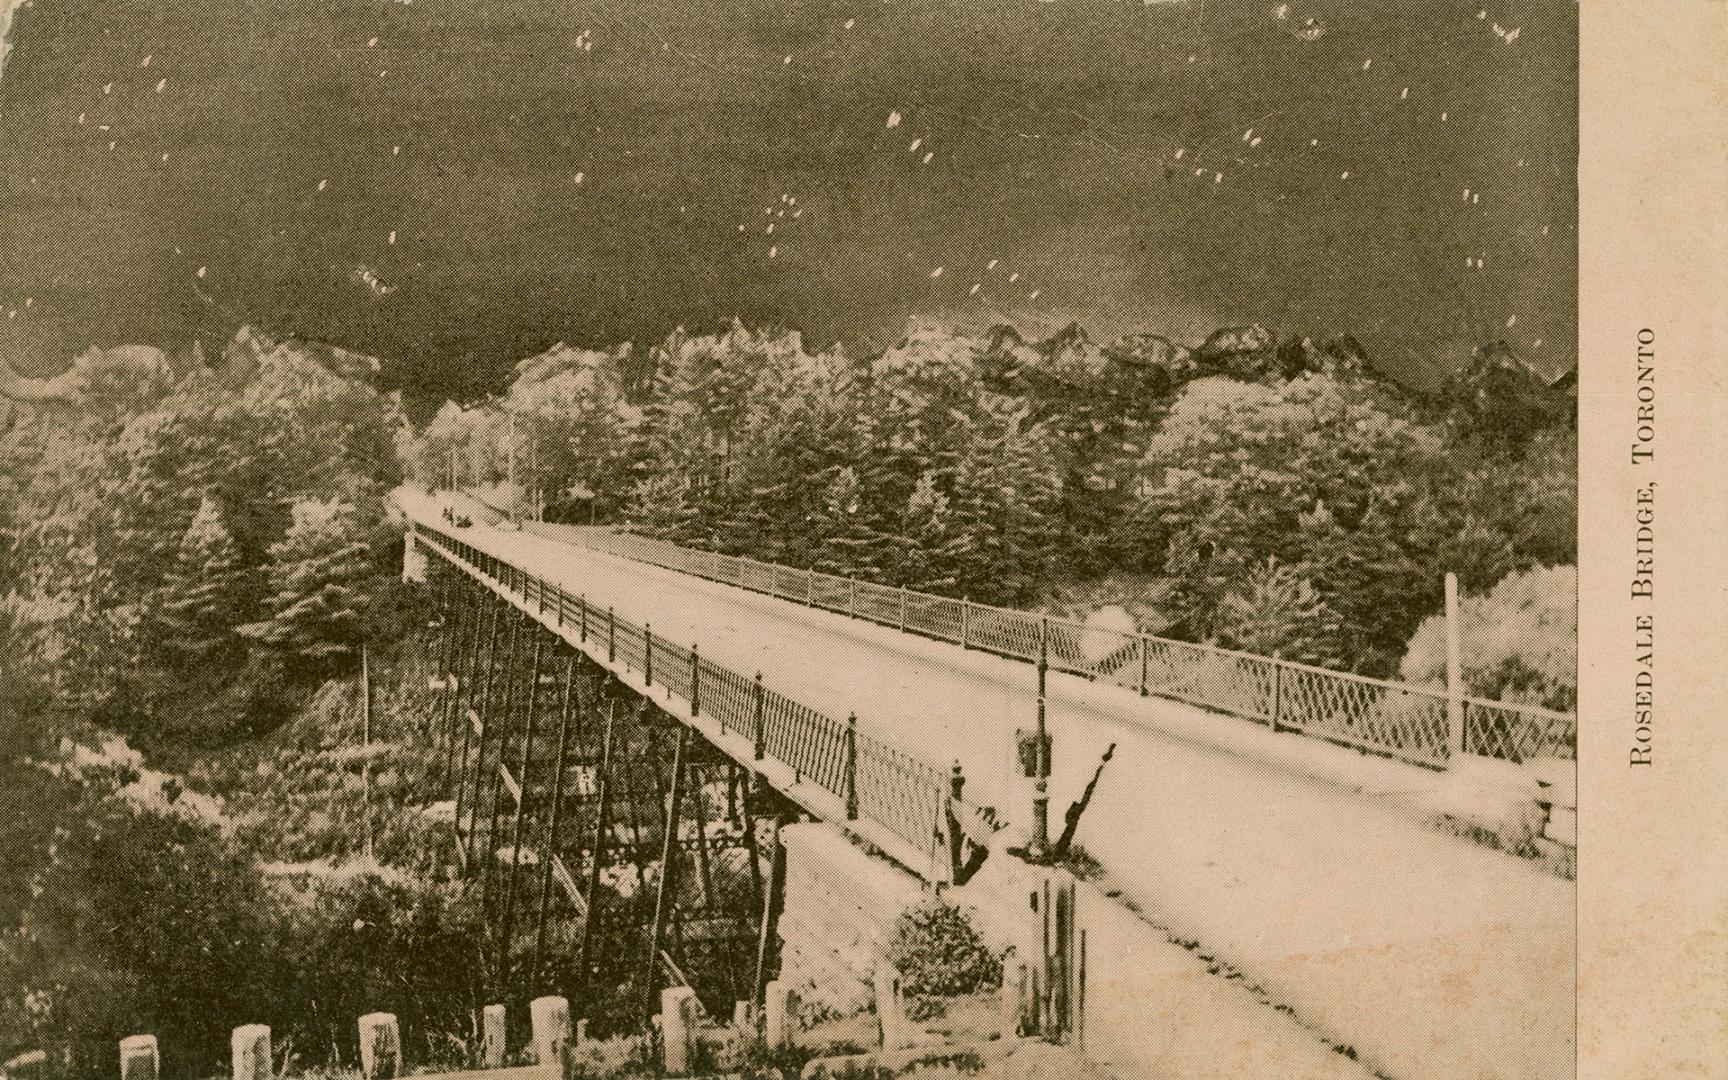 Sepia-toned postcard depicting a photo of the Rosedale Bridge and ravine, with caption, "Roseda ...